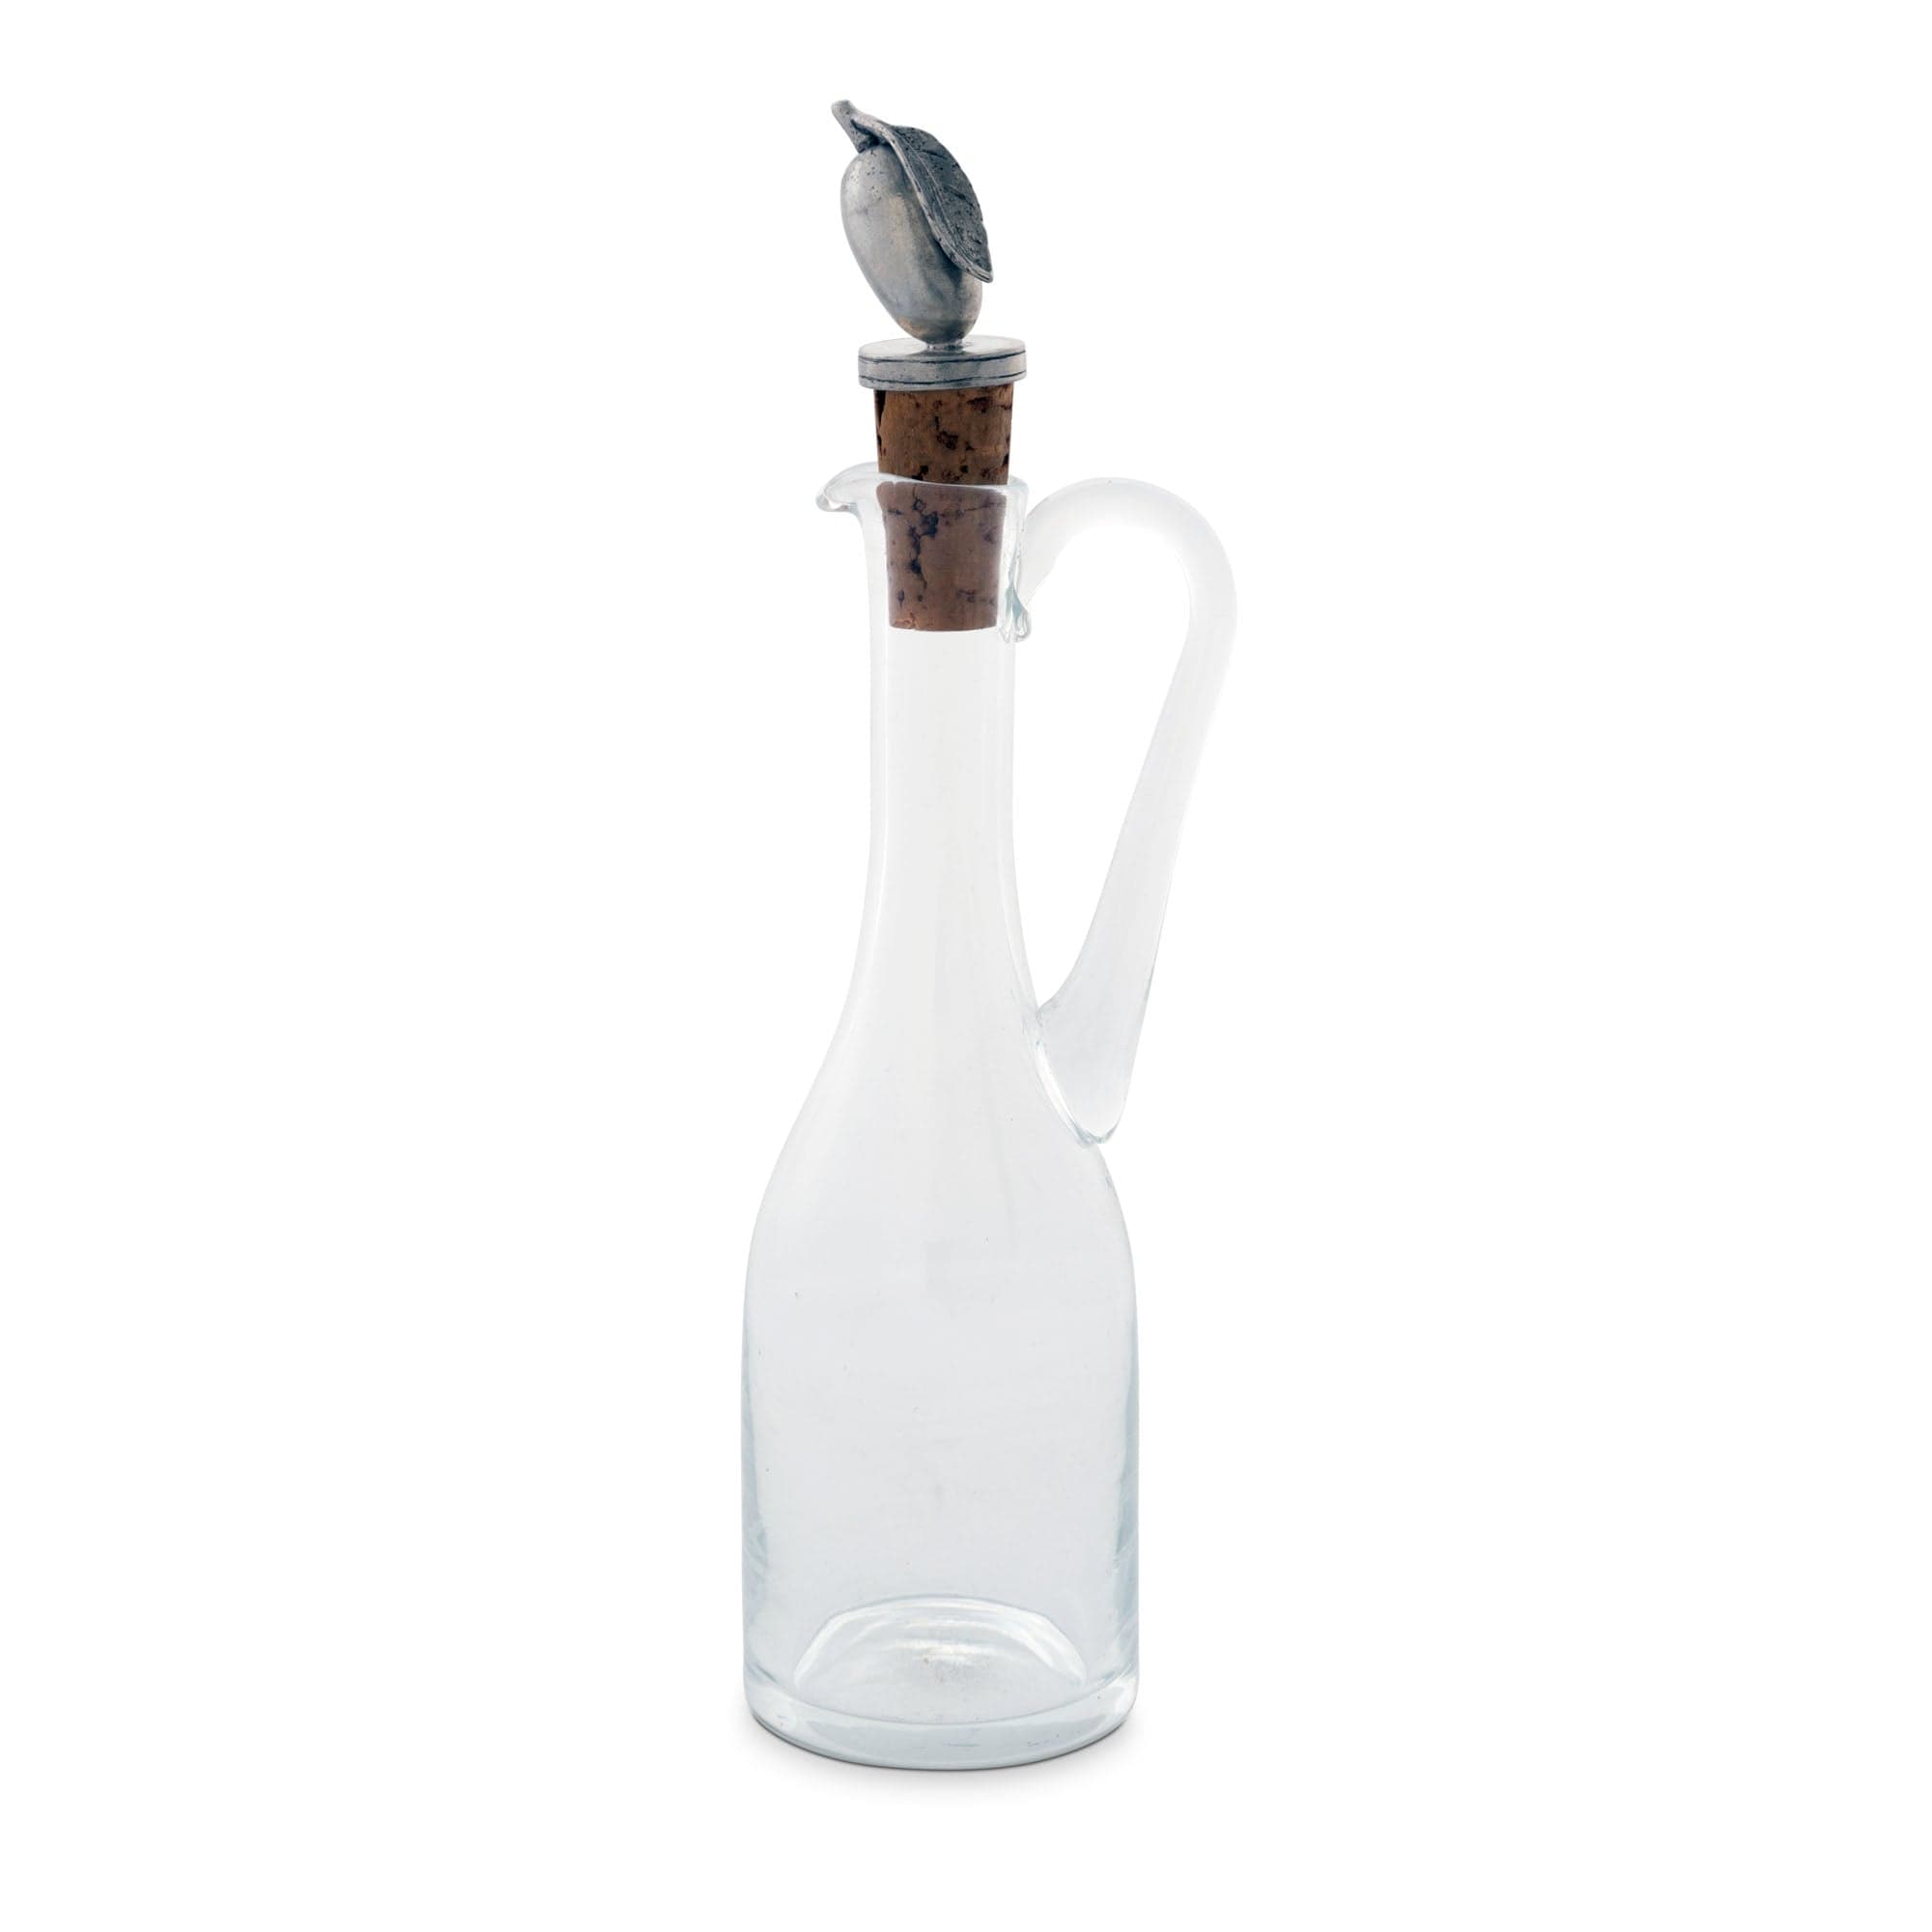 Image of Cruet Bottle with Pewter Olive Head Cork Stopper